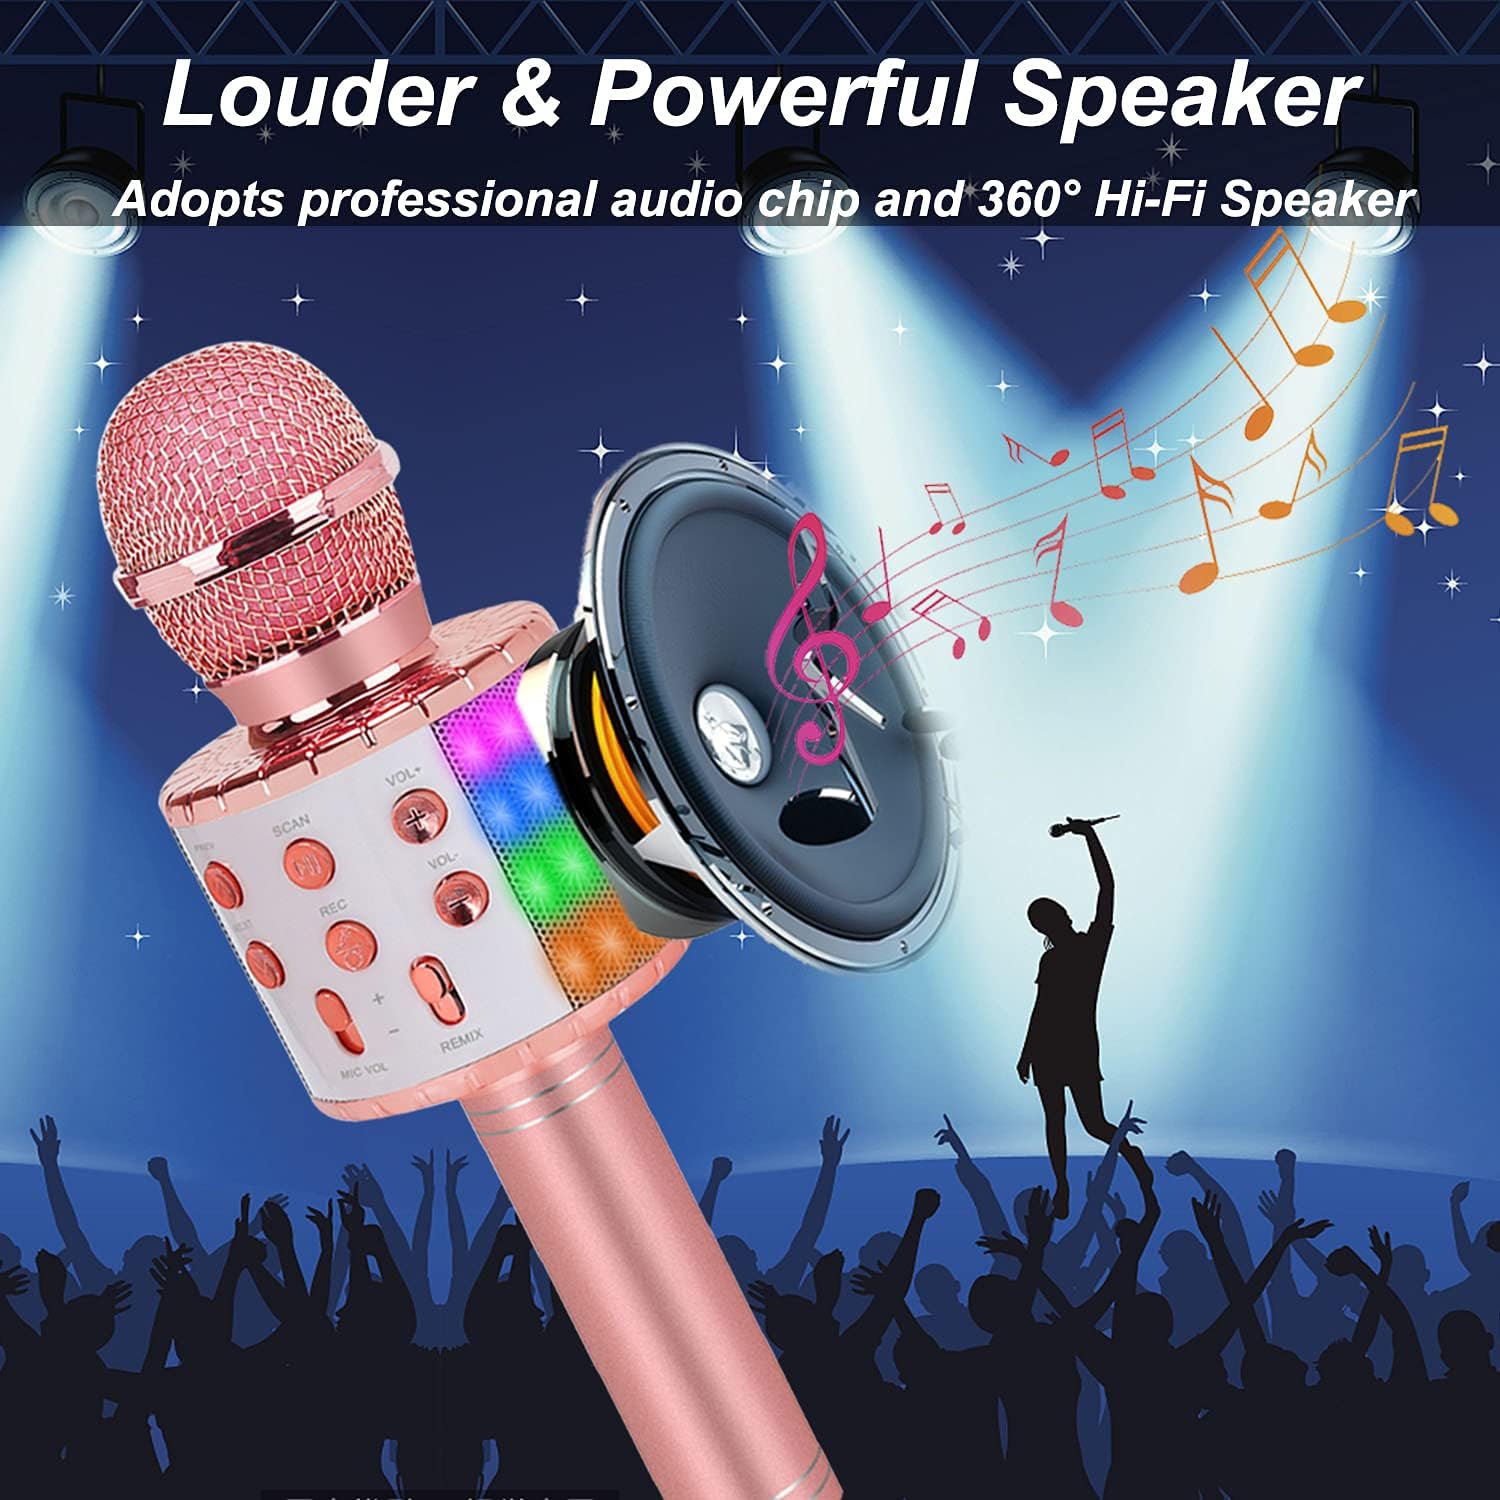 Toys for Girls Karaoke Microphone - Portable Wireless Bluetooth Karaoke Mic Machine with Flashlights, 3 4 5 Year Old Girl Birthday Gifts,Kids Toys for 6 7 8 9 10 Year Old Girl Stuff Teen